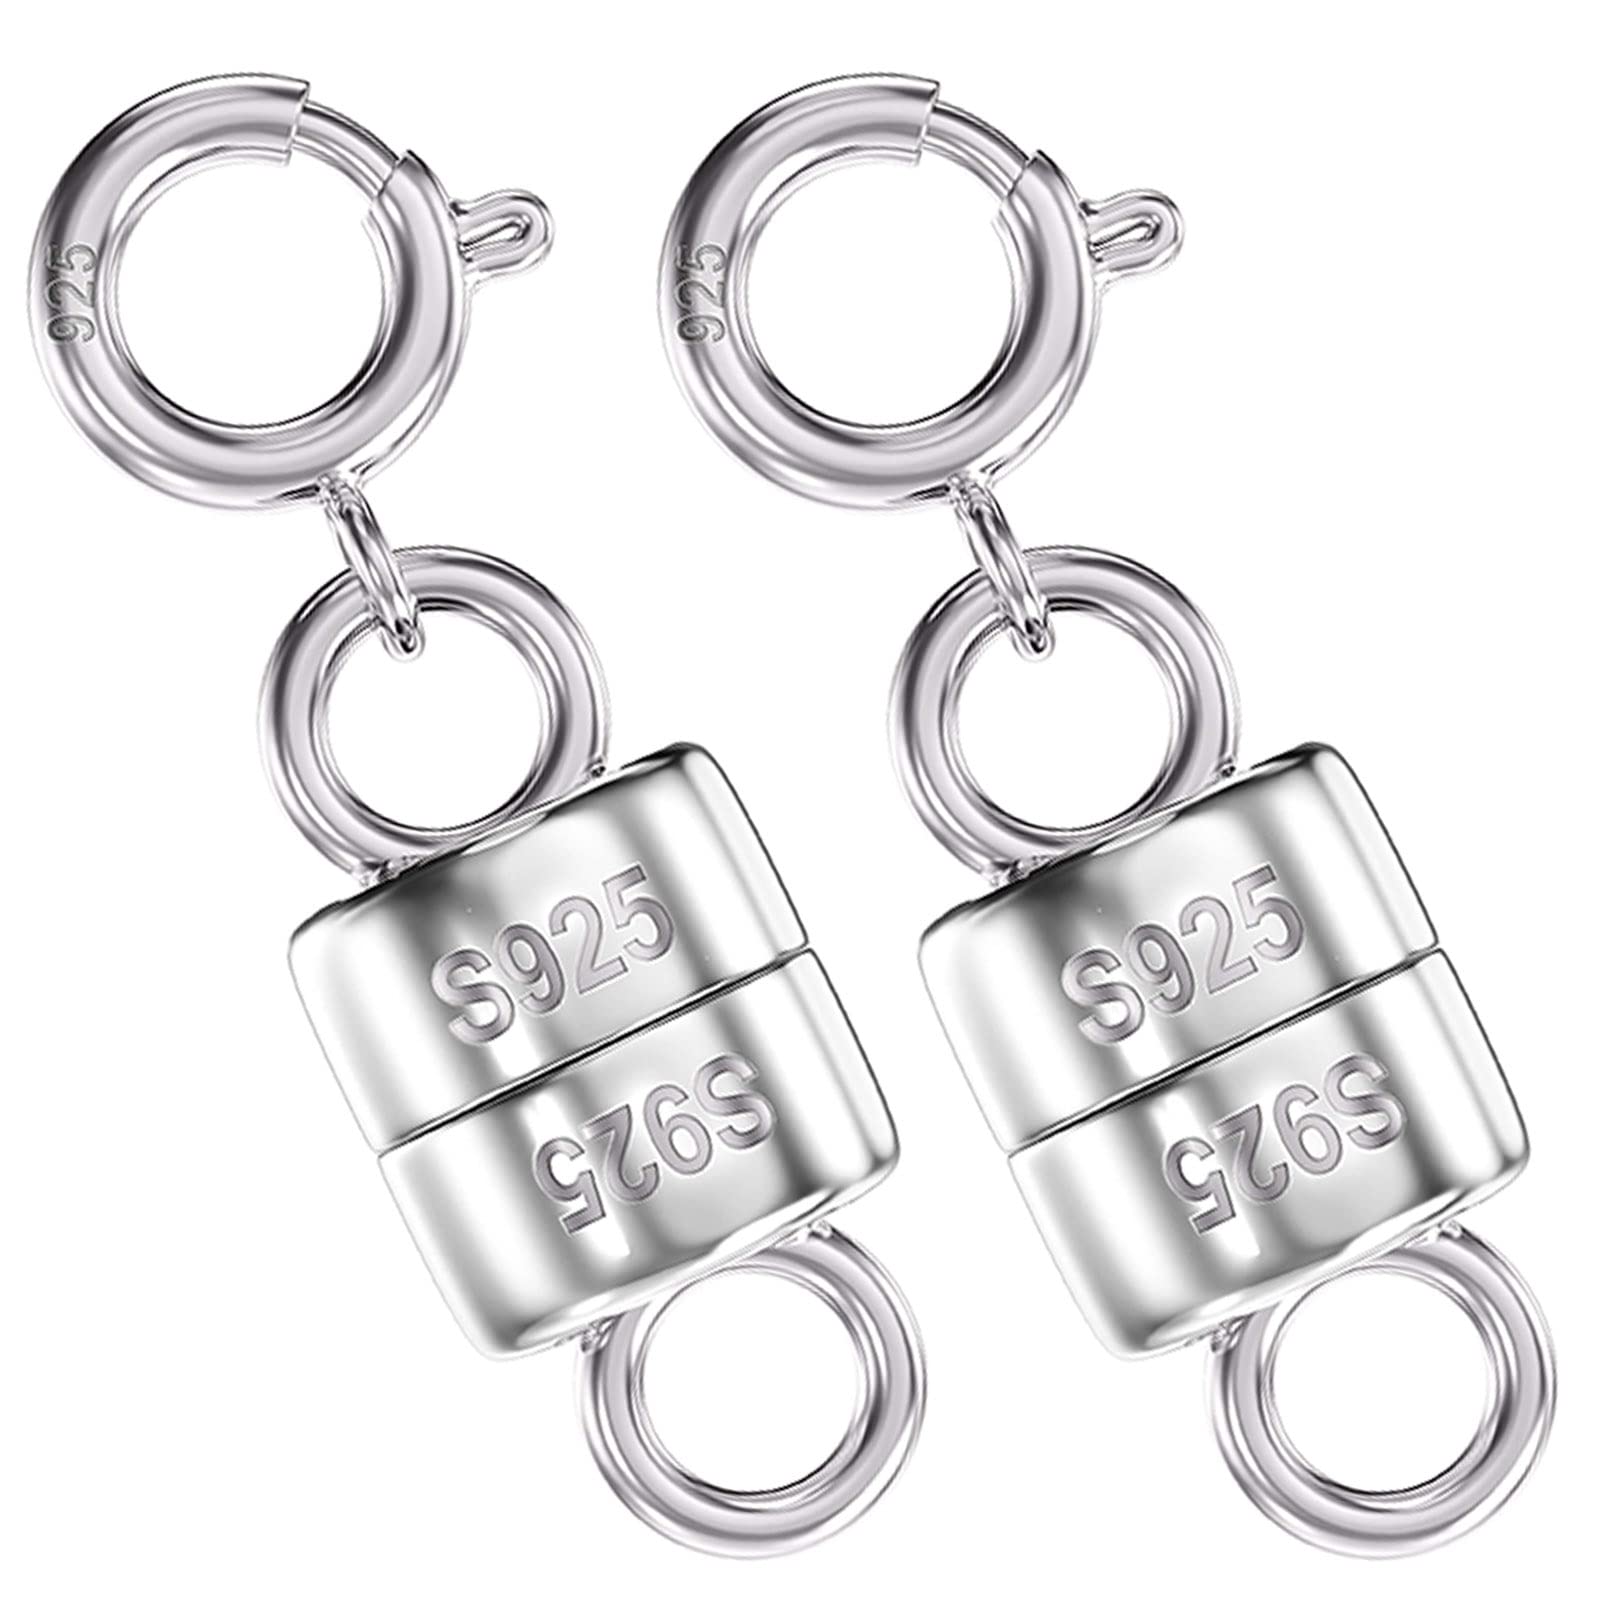 Qulltk 925 Sterling Silver Magnetic Necklace Clasps and Closures